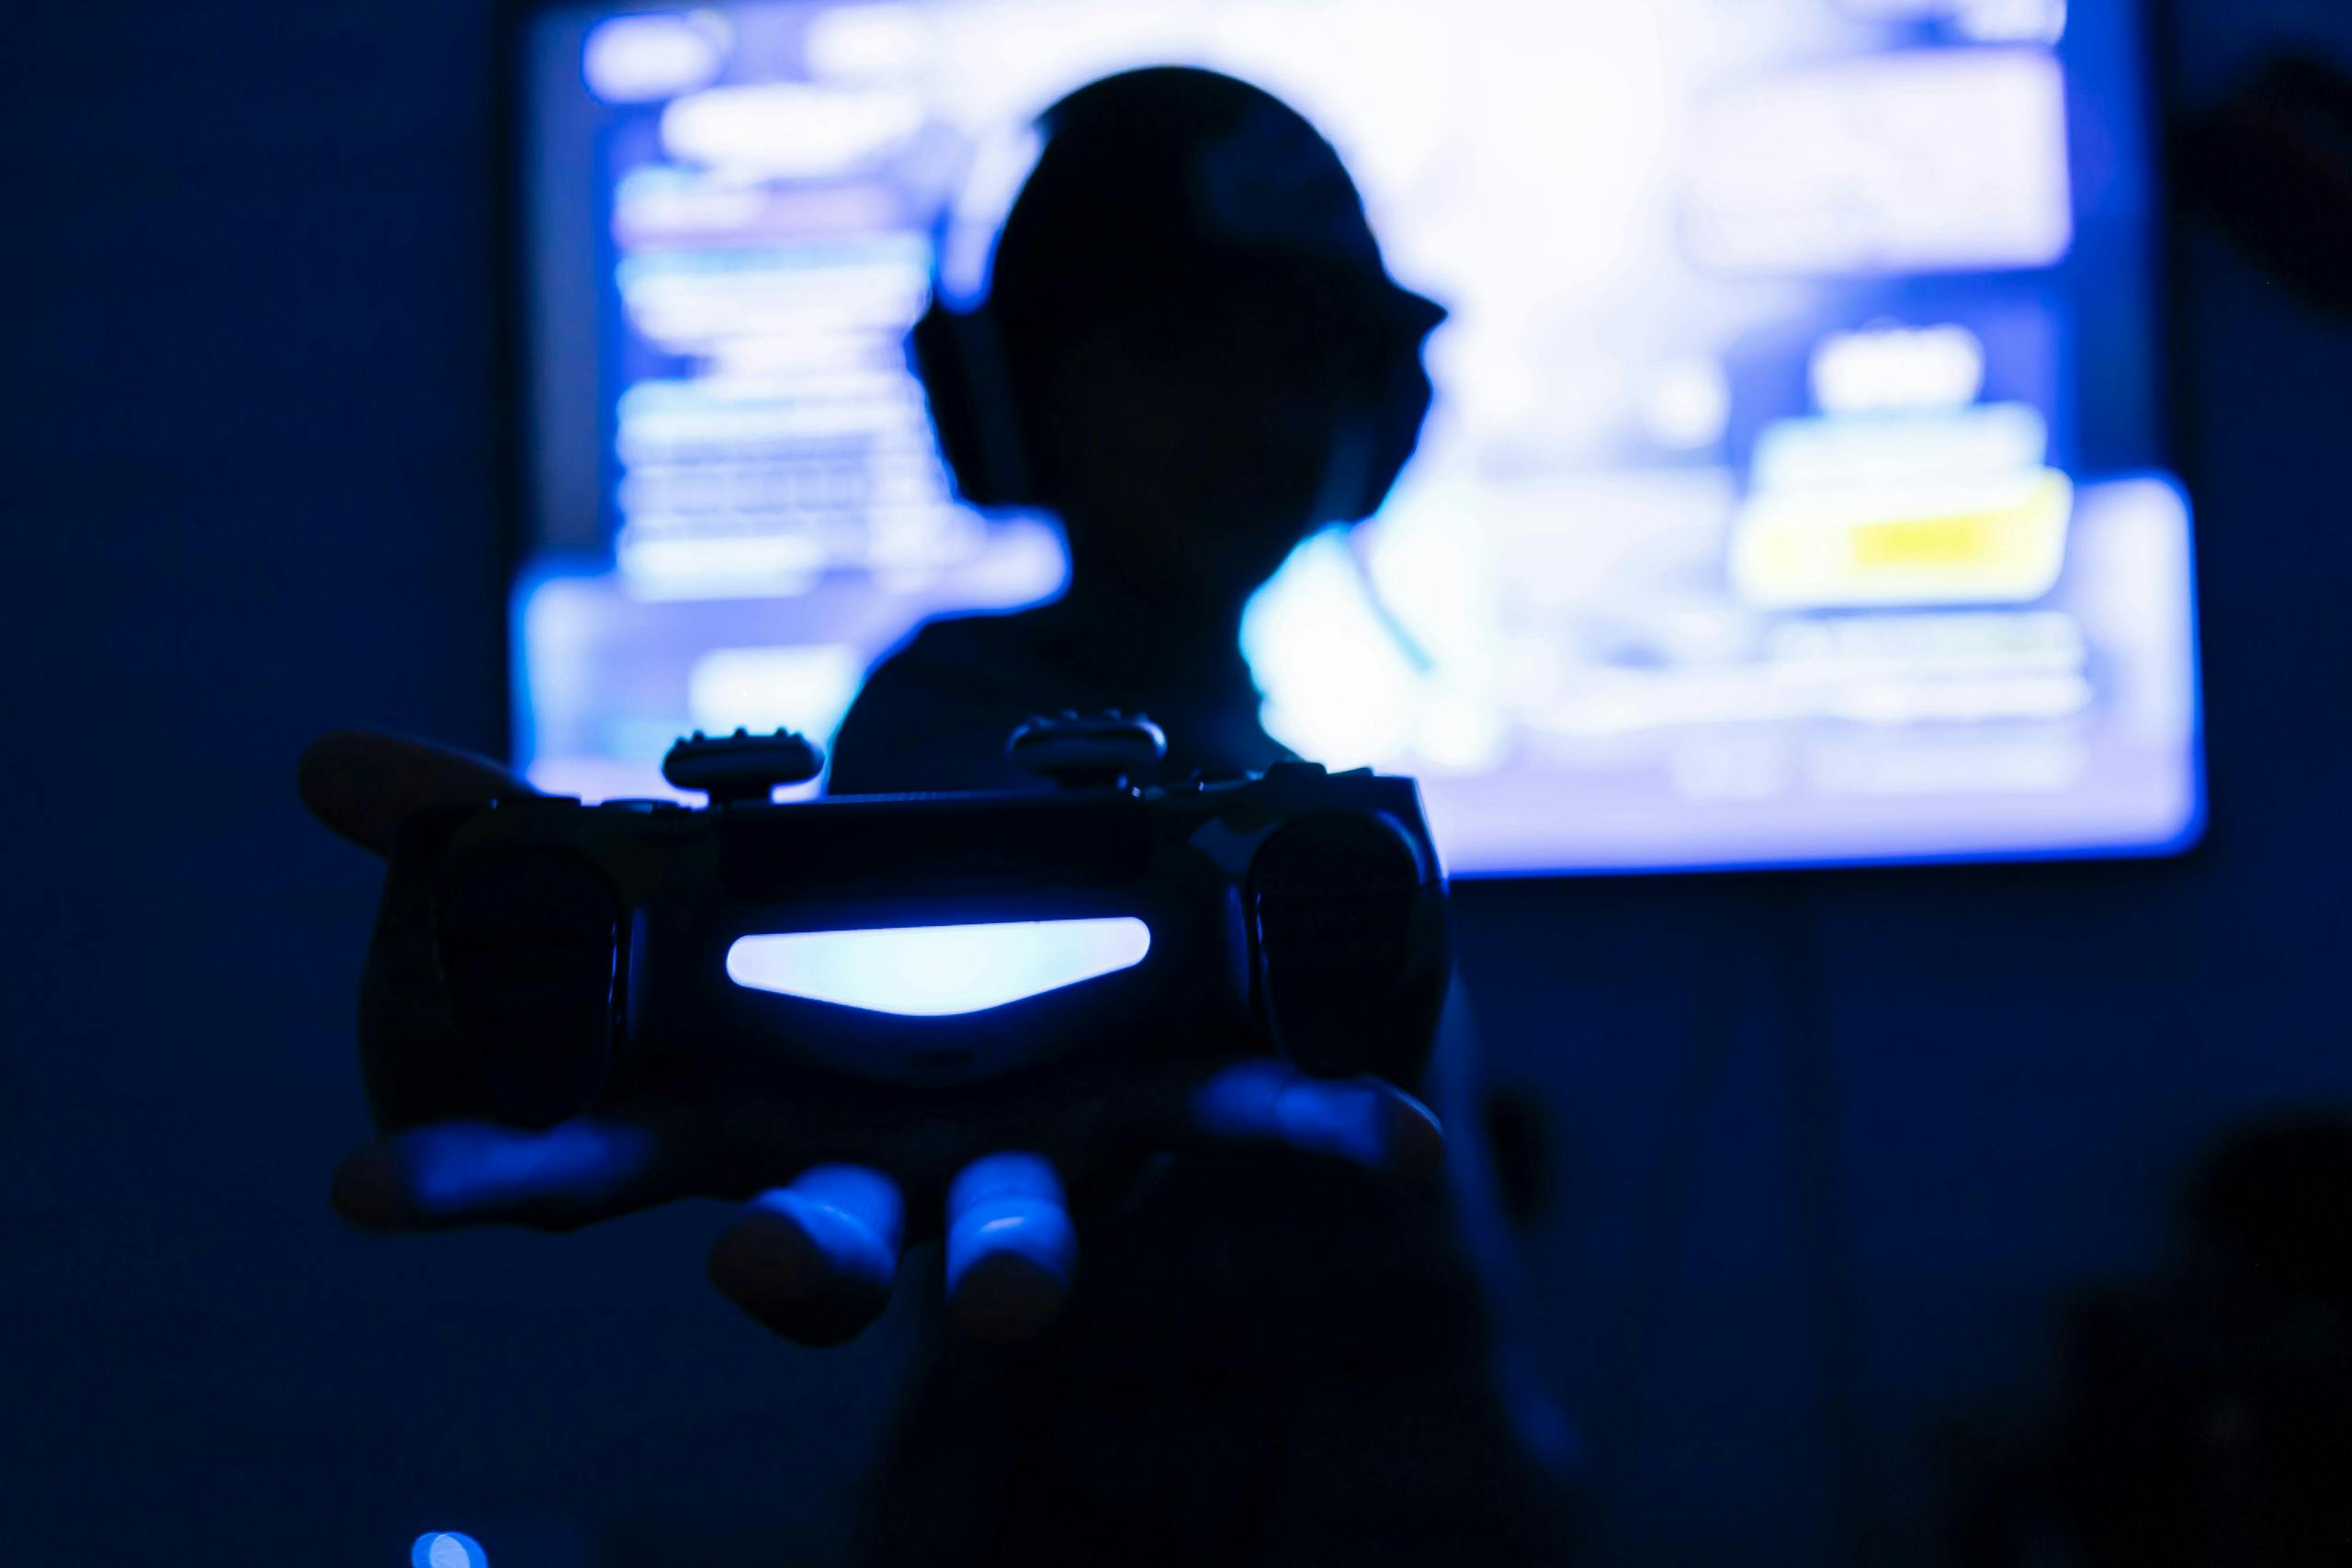 Silhouette of a man playing video games